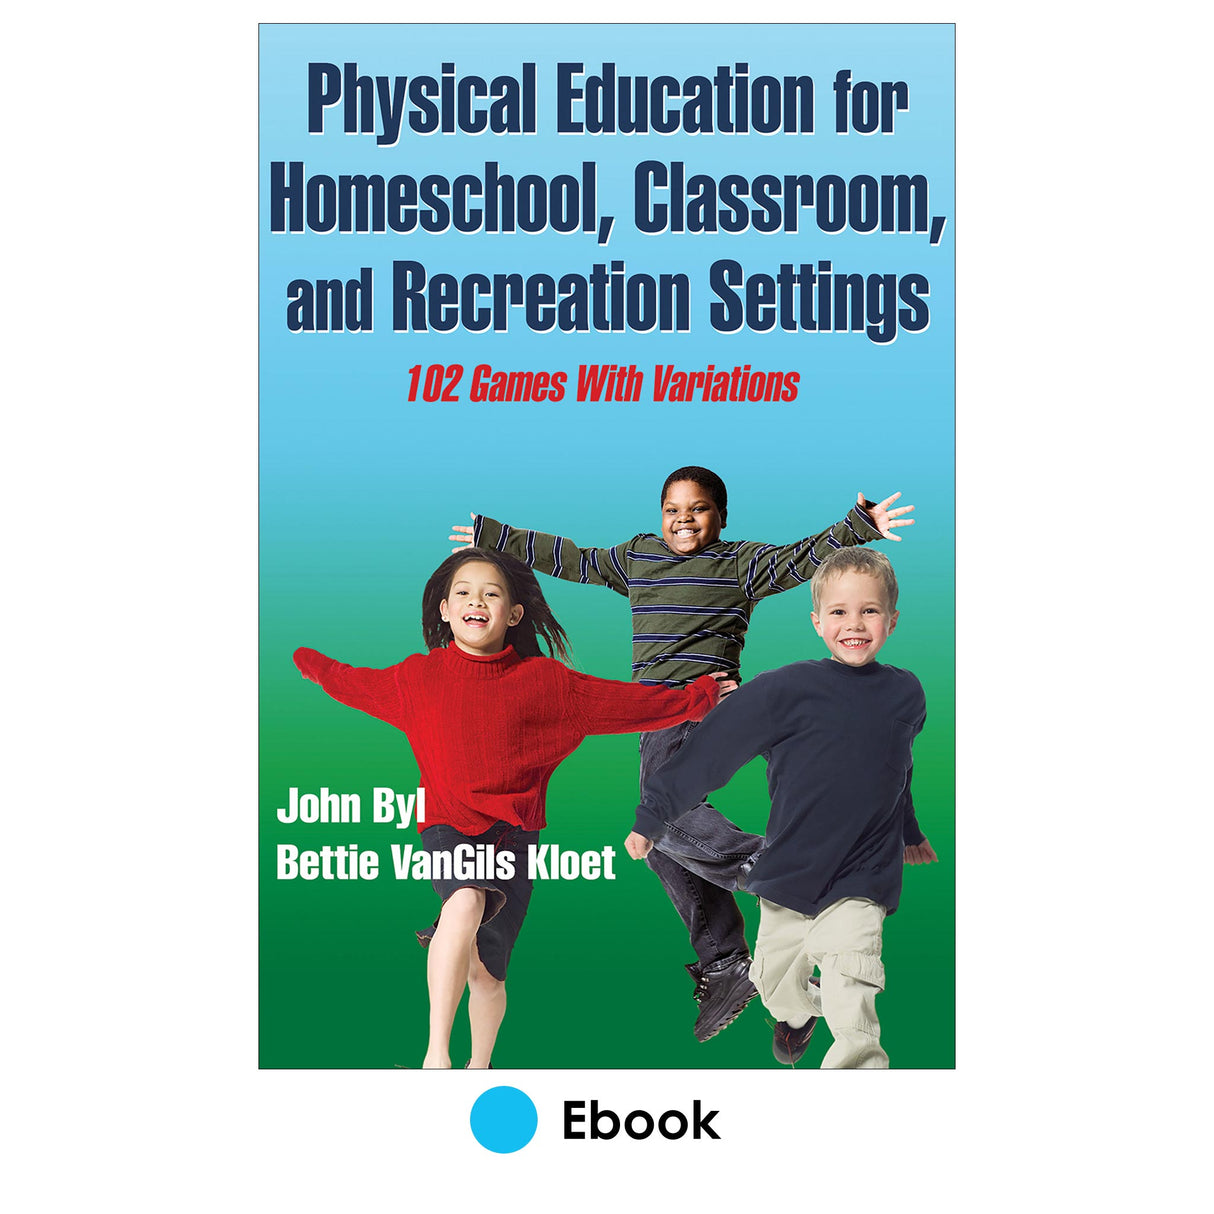 Physical Education for Homeschool, Classroom, and Recreation Settings PDF